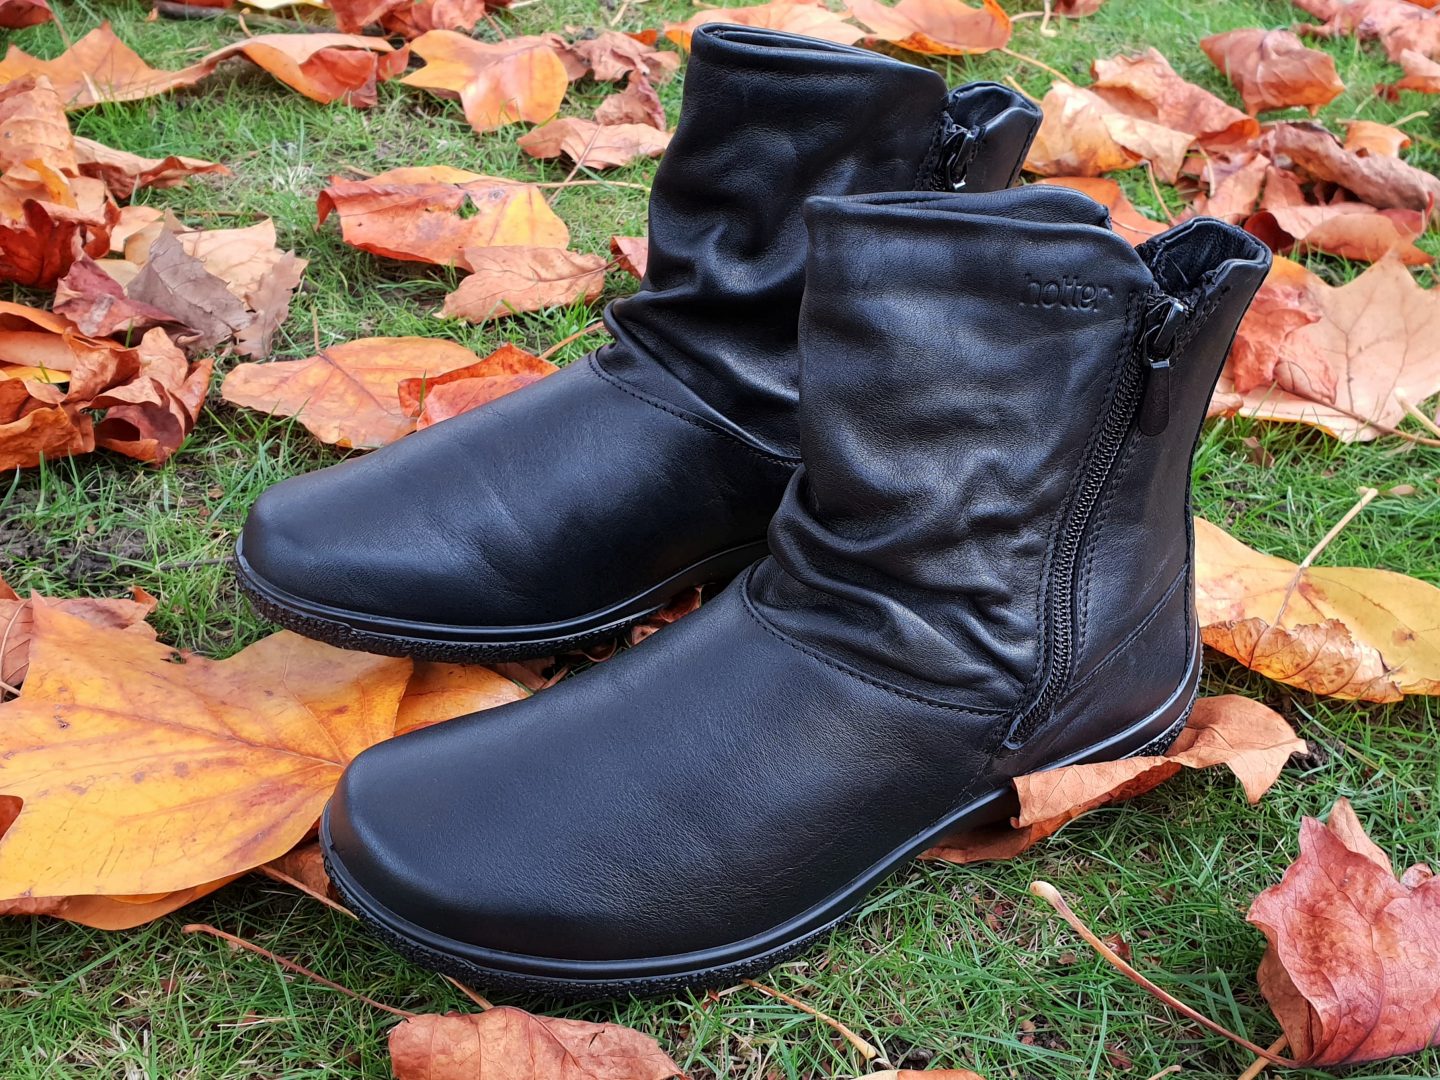 hotter whisper boots best price